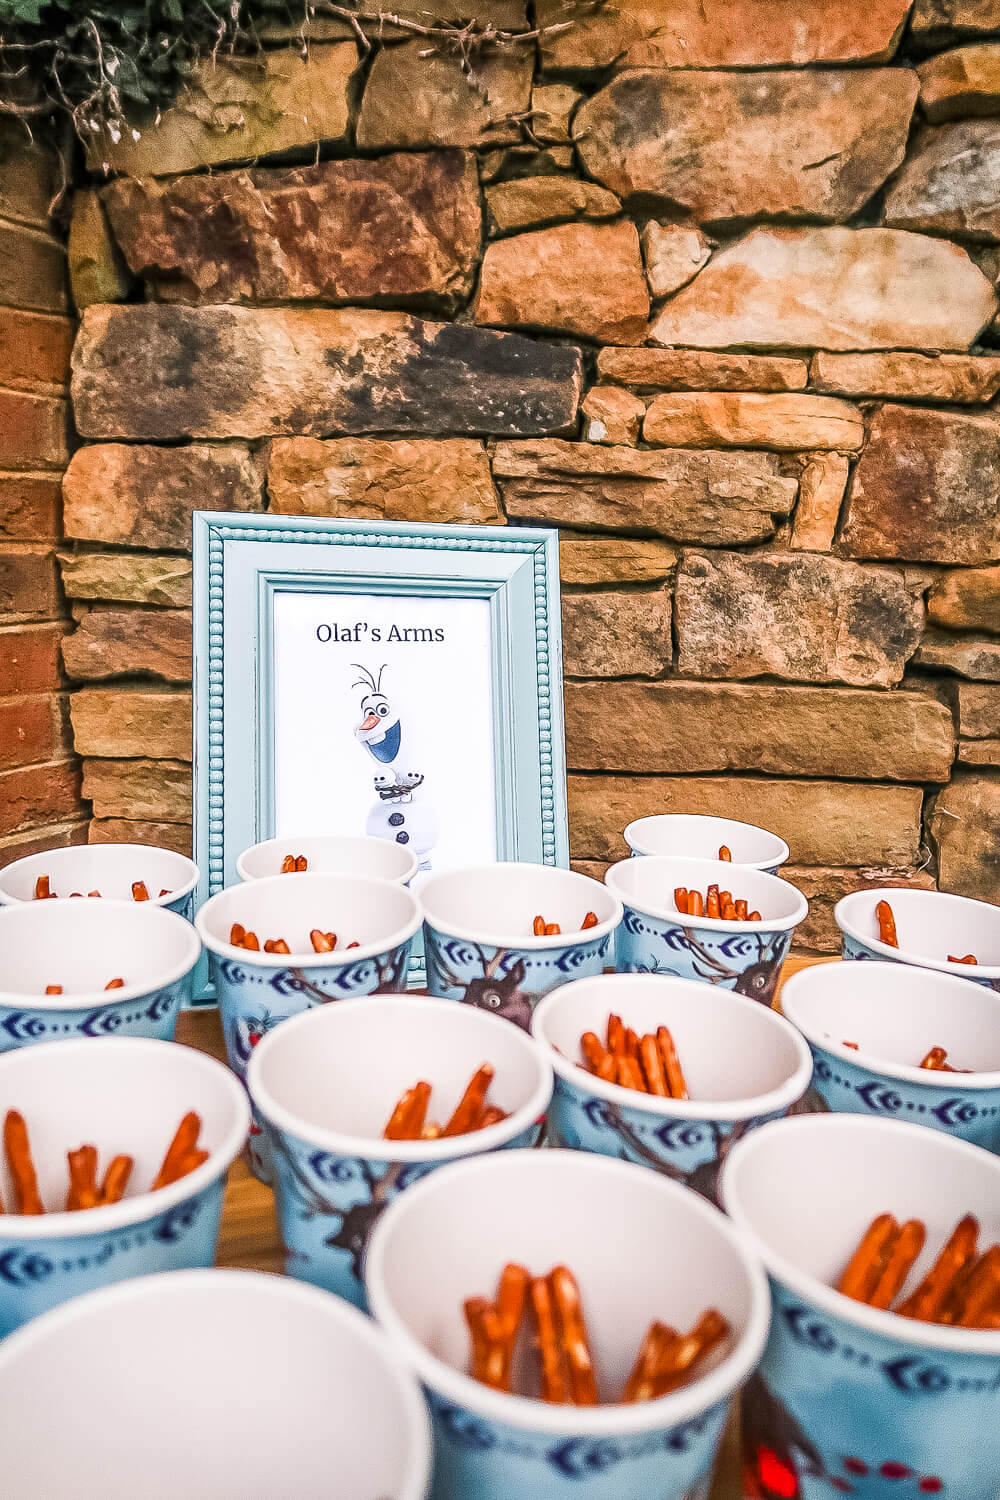 cups of olaf's arms with pretzel rods in them